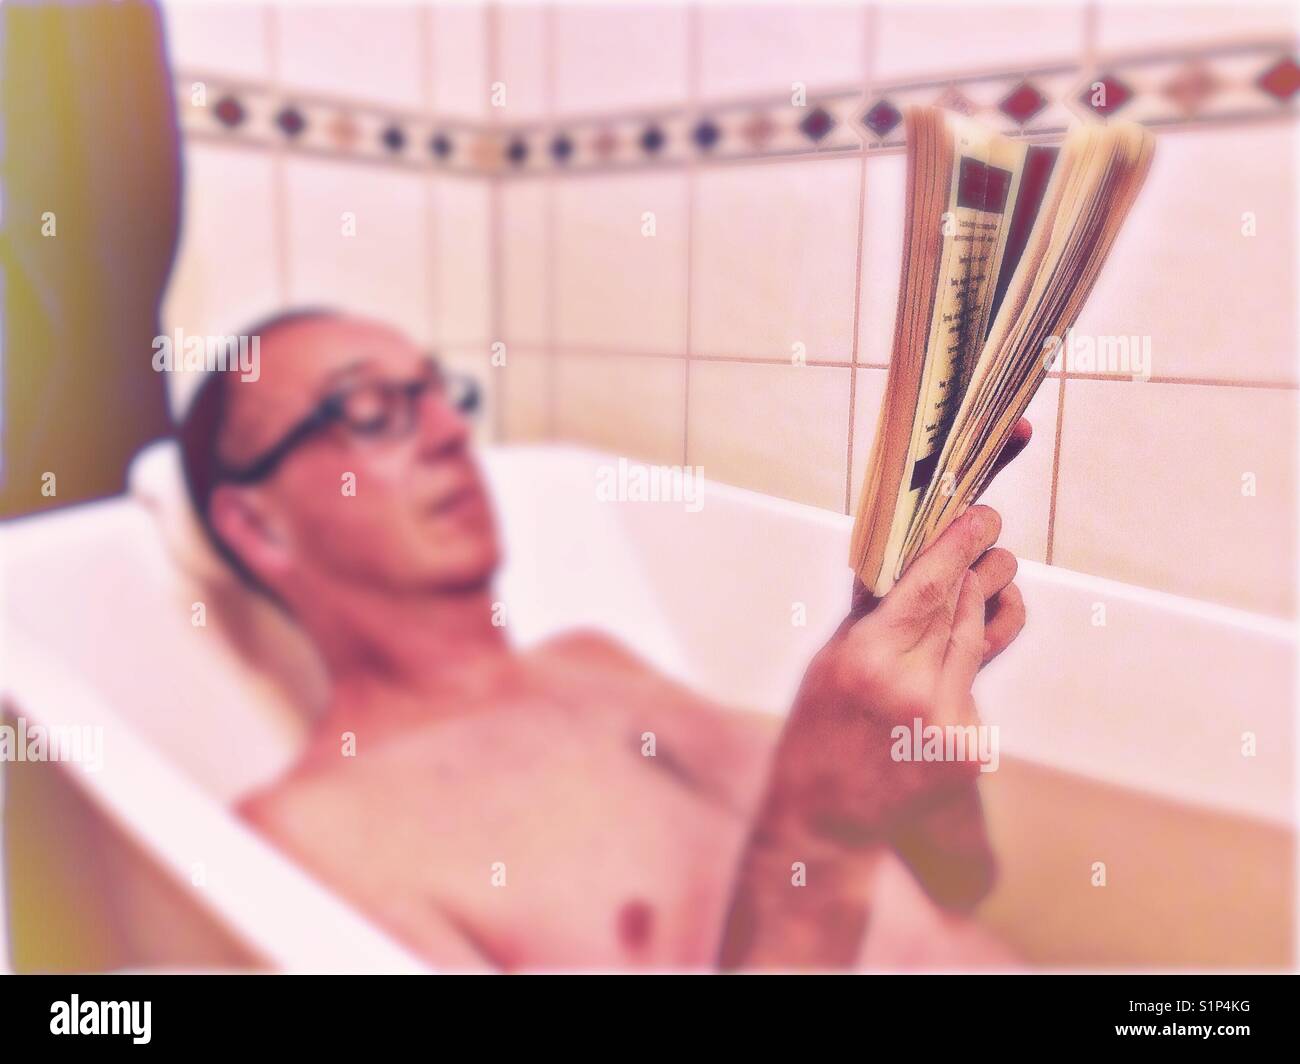 Middle aged man relaxing reading in bath blur with focus on book Stock Photo